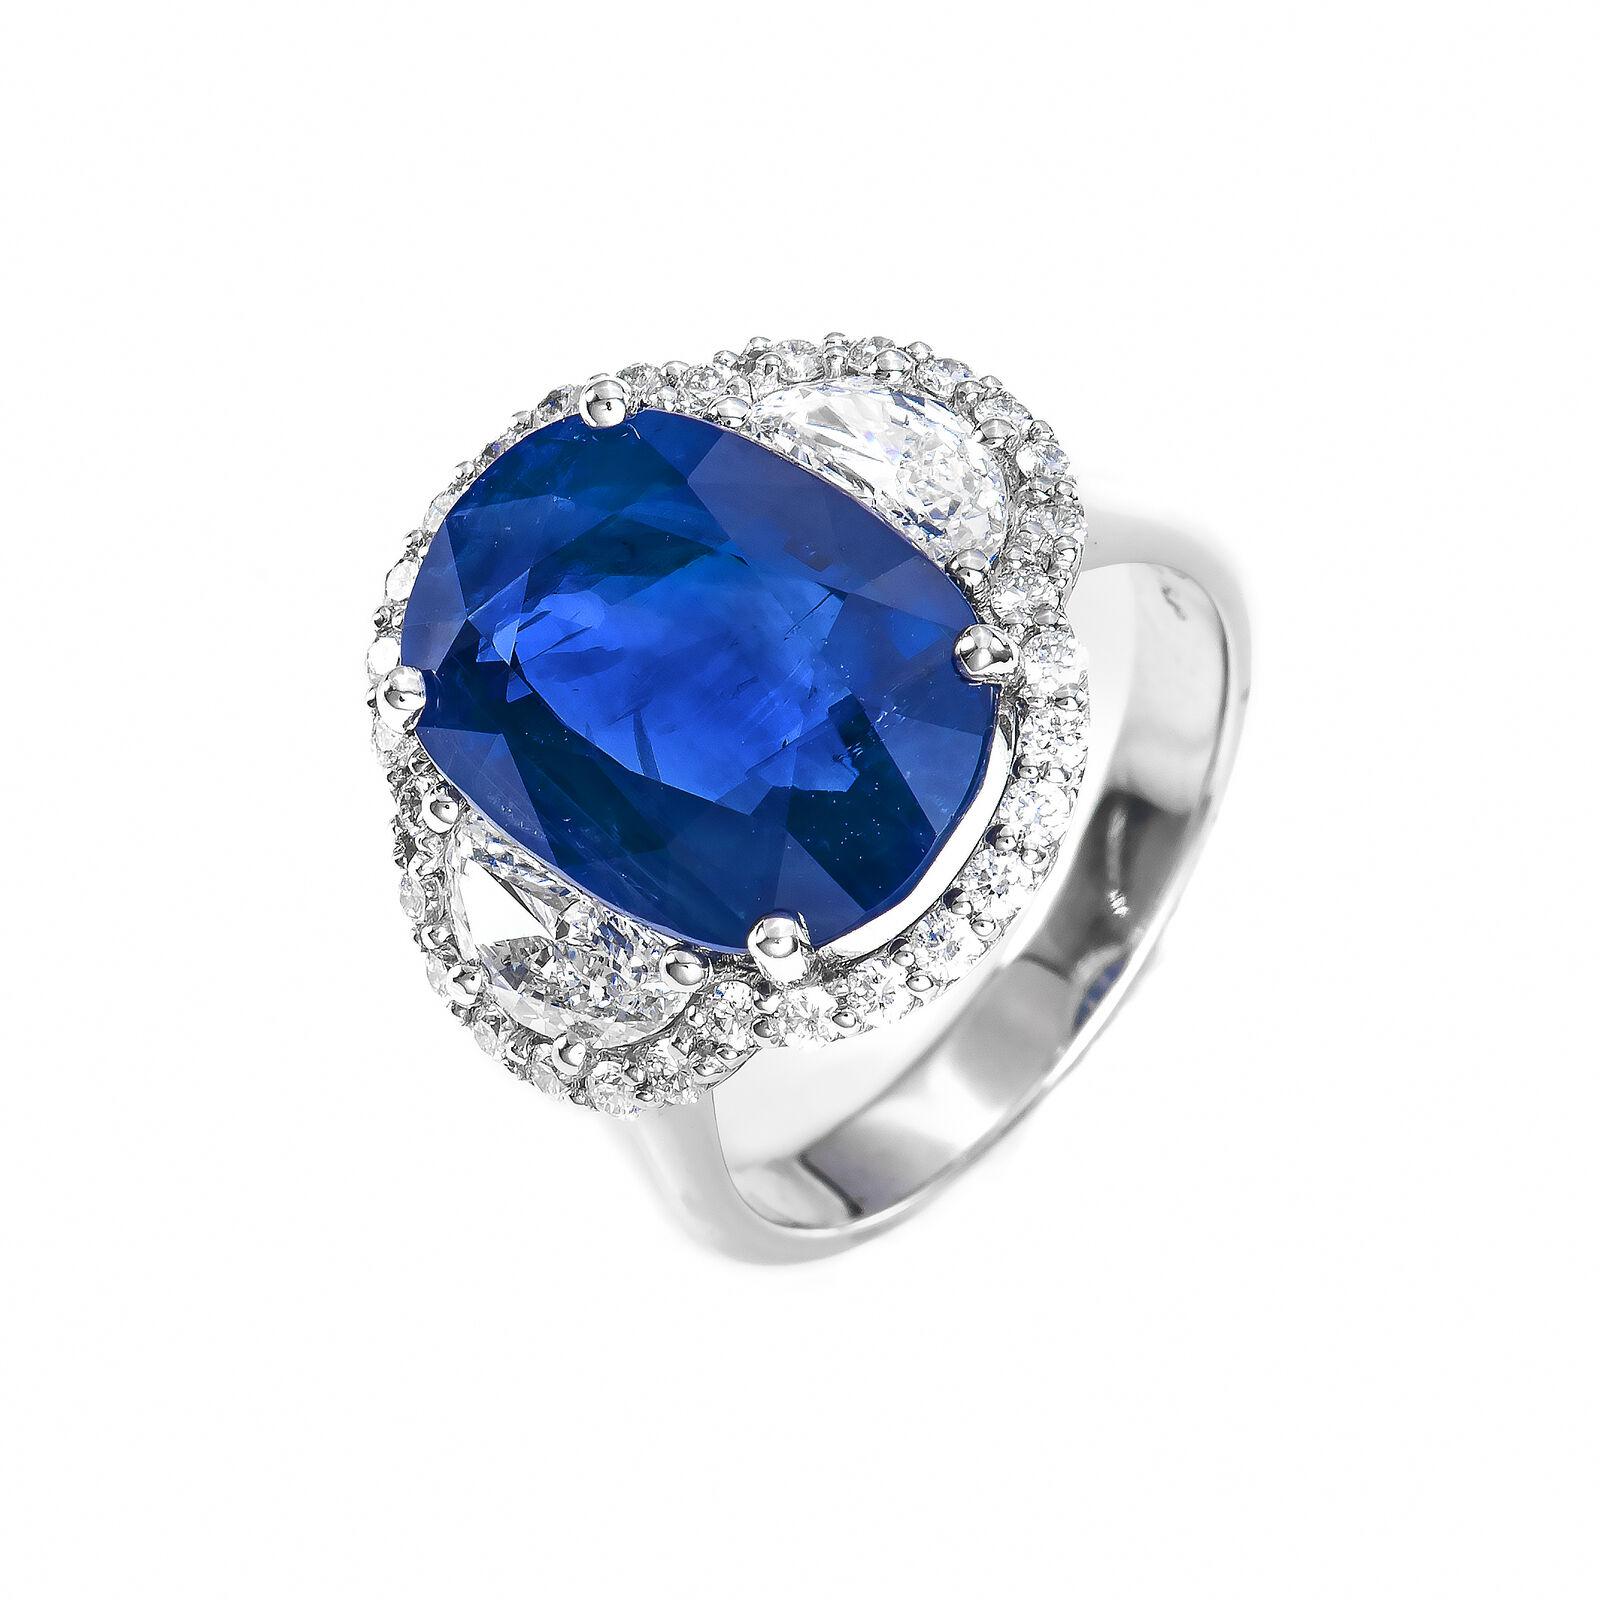 Gorgeous one of a kind designer GIA certified natural Gem quality  royal blue color sapphire and diamond ring. This gorgeous piece is made with a center stone being an 7.71 carat natural Ceylon blue sapphire and two half moon diamonds surrounded by